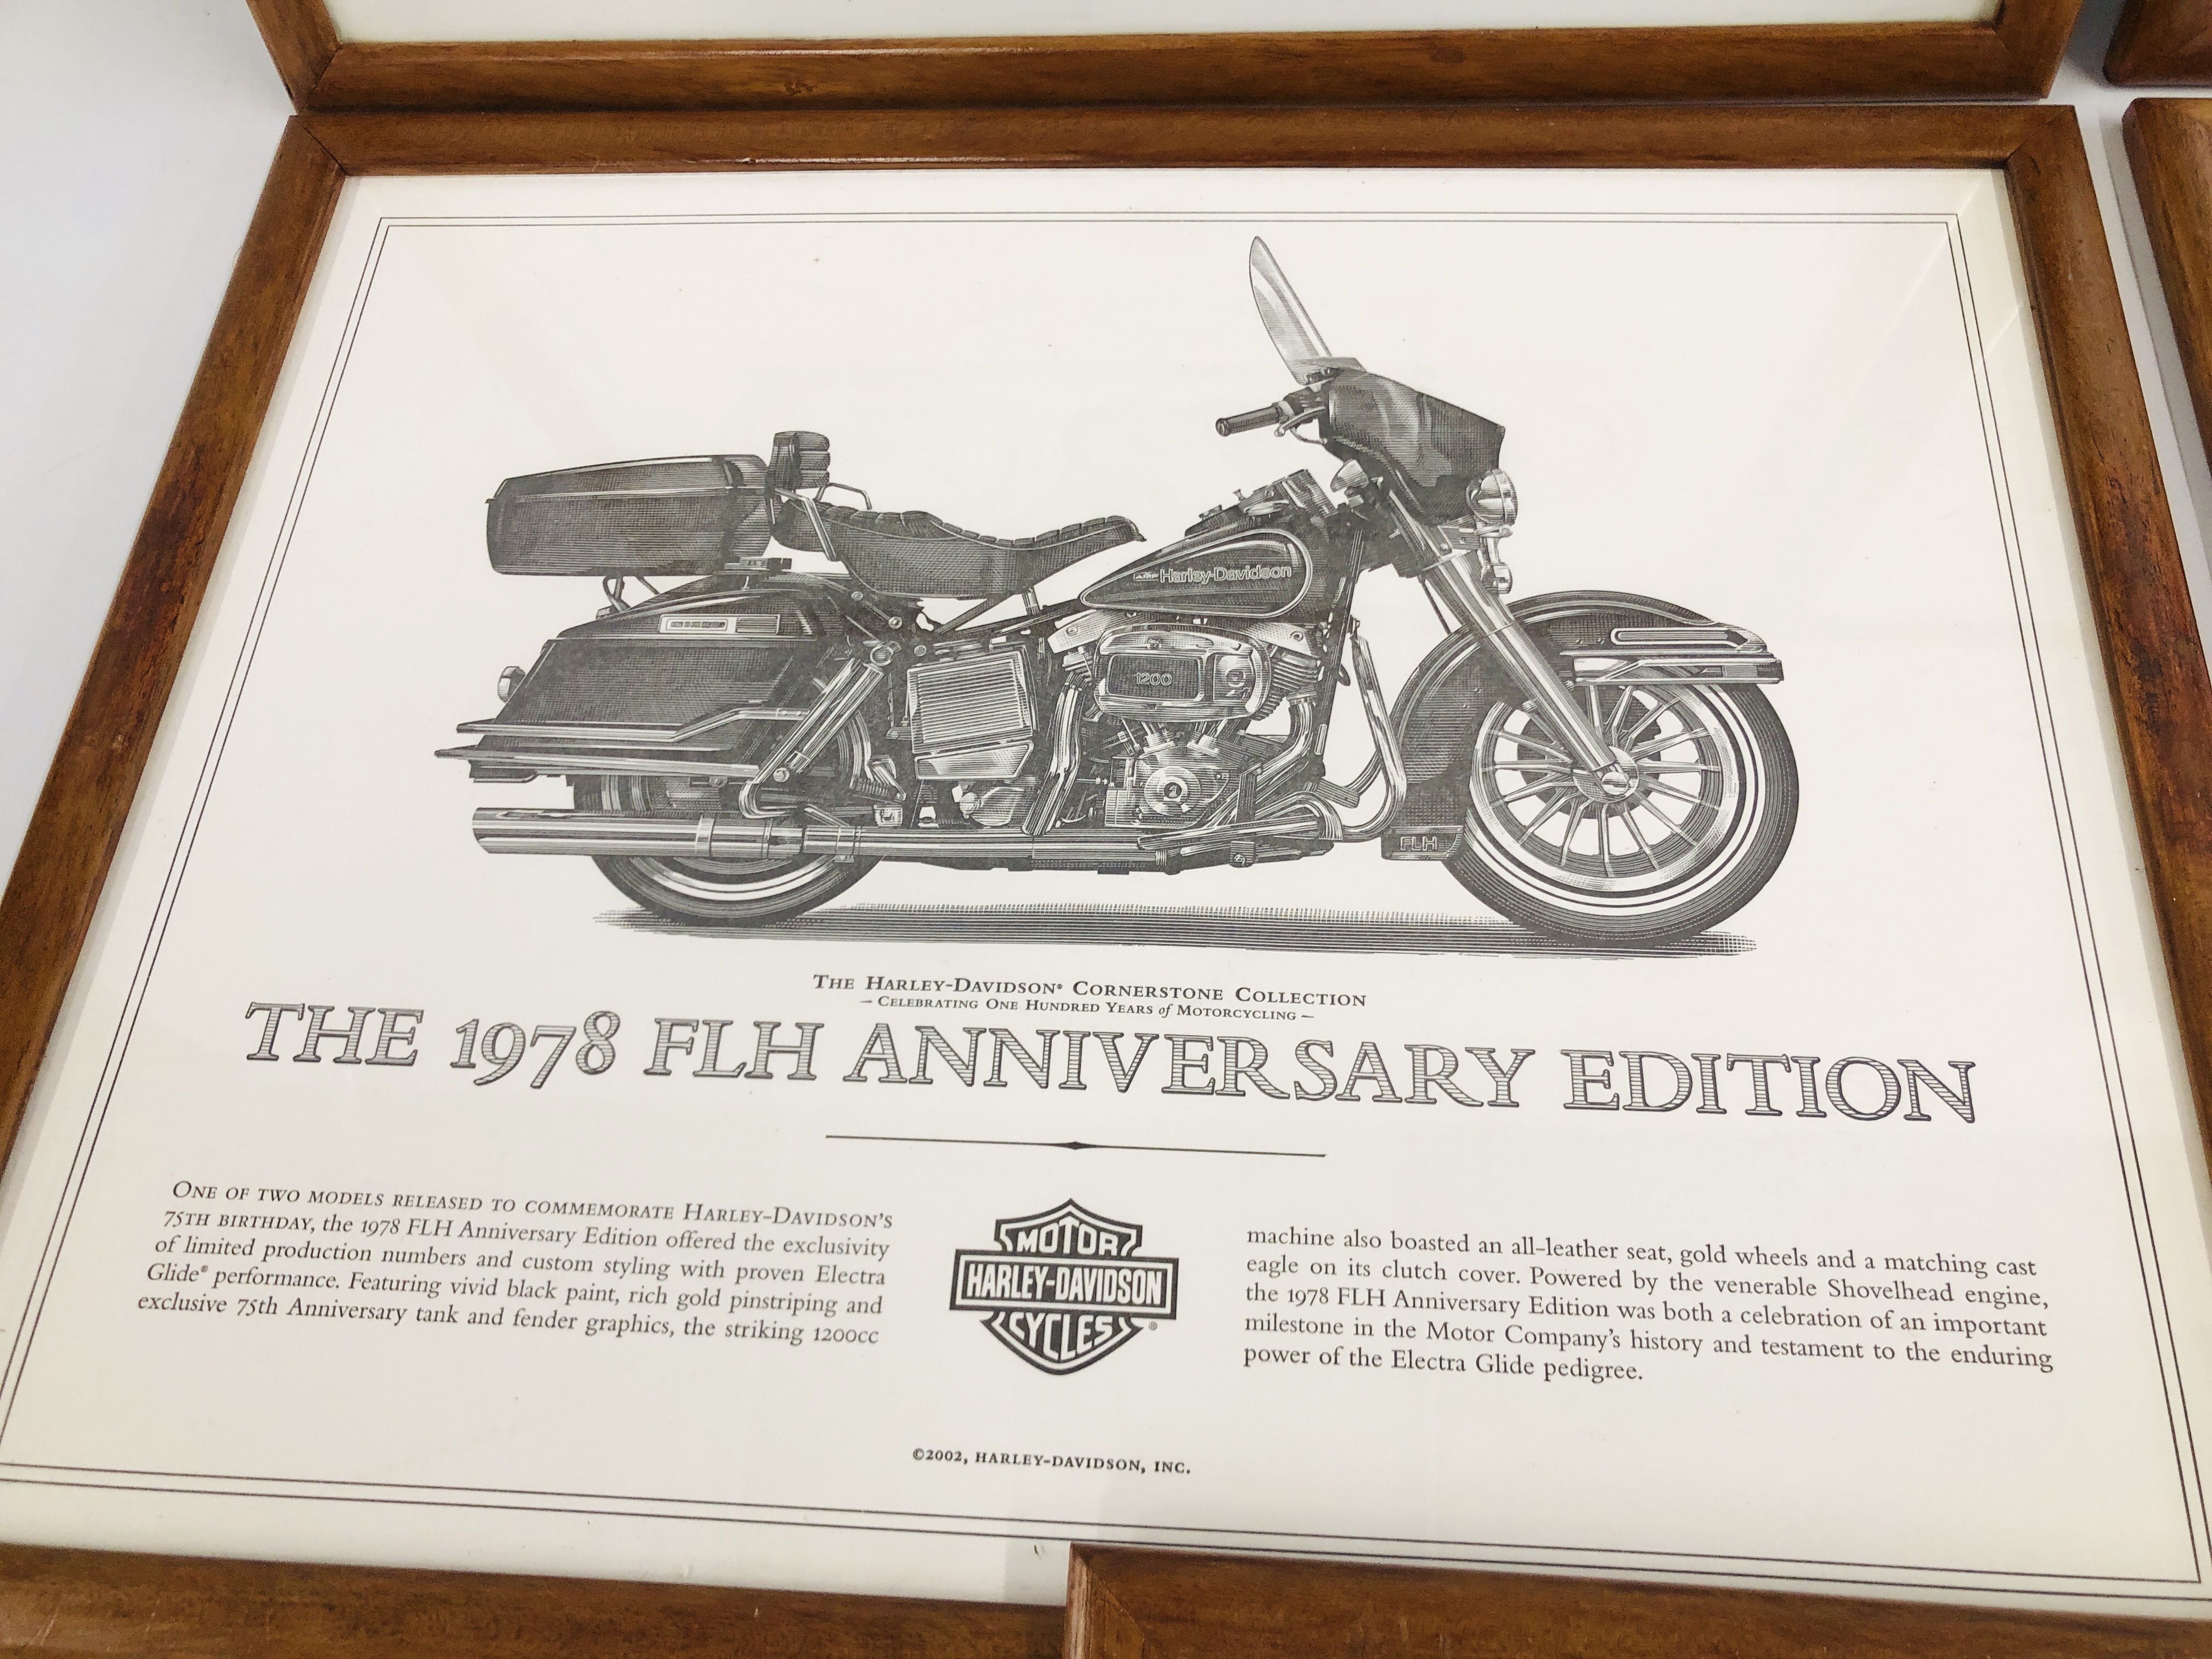 A GROUP OF 5 HARLEY-DAVIDSON MOTORCYCLE PRINTS, 54CM X 44CM. - Image 4 of 6